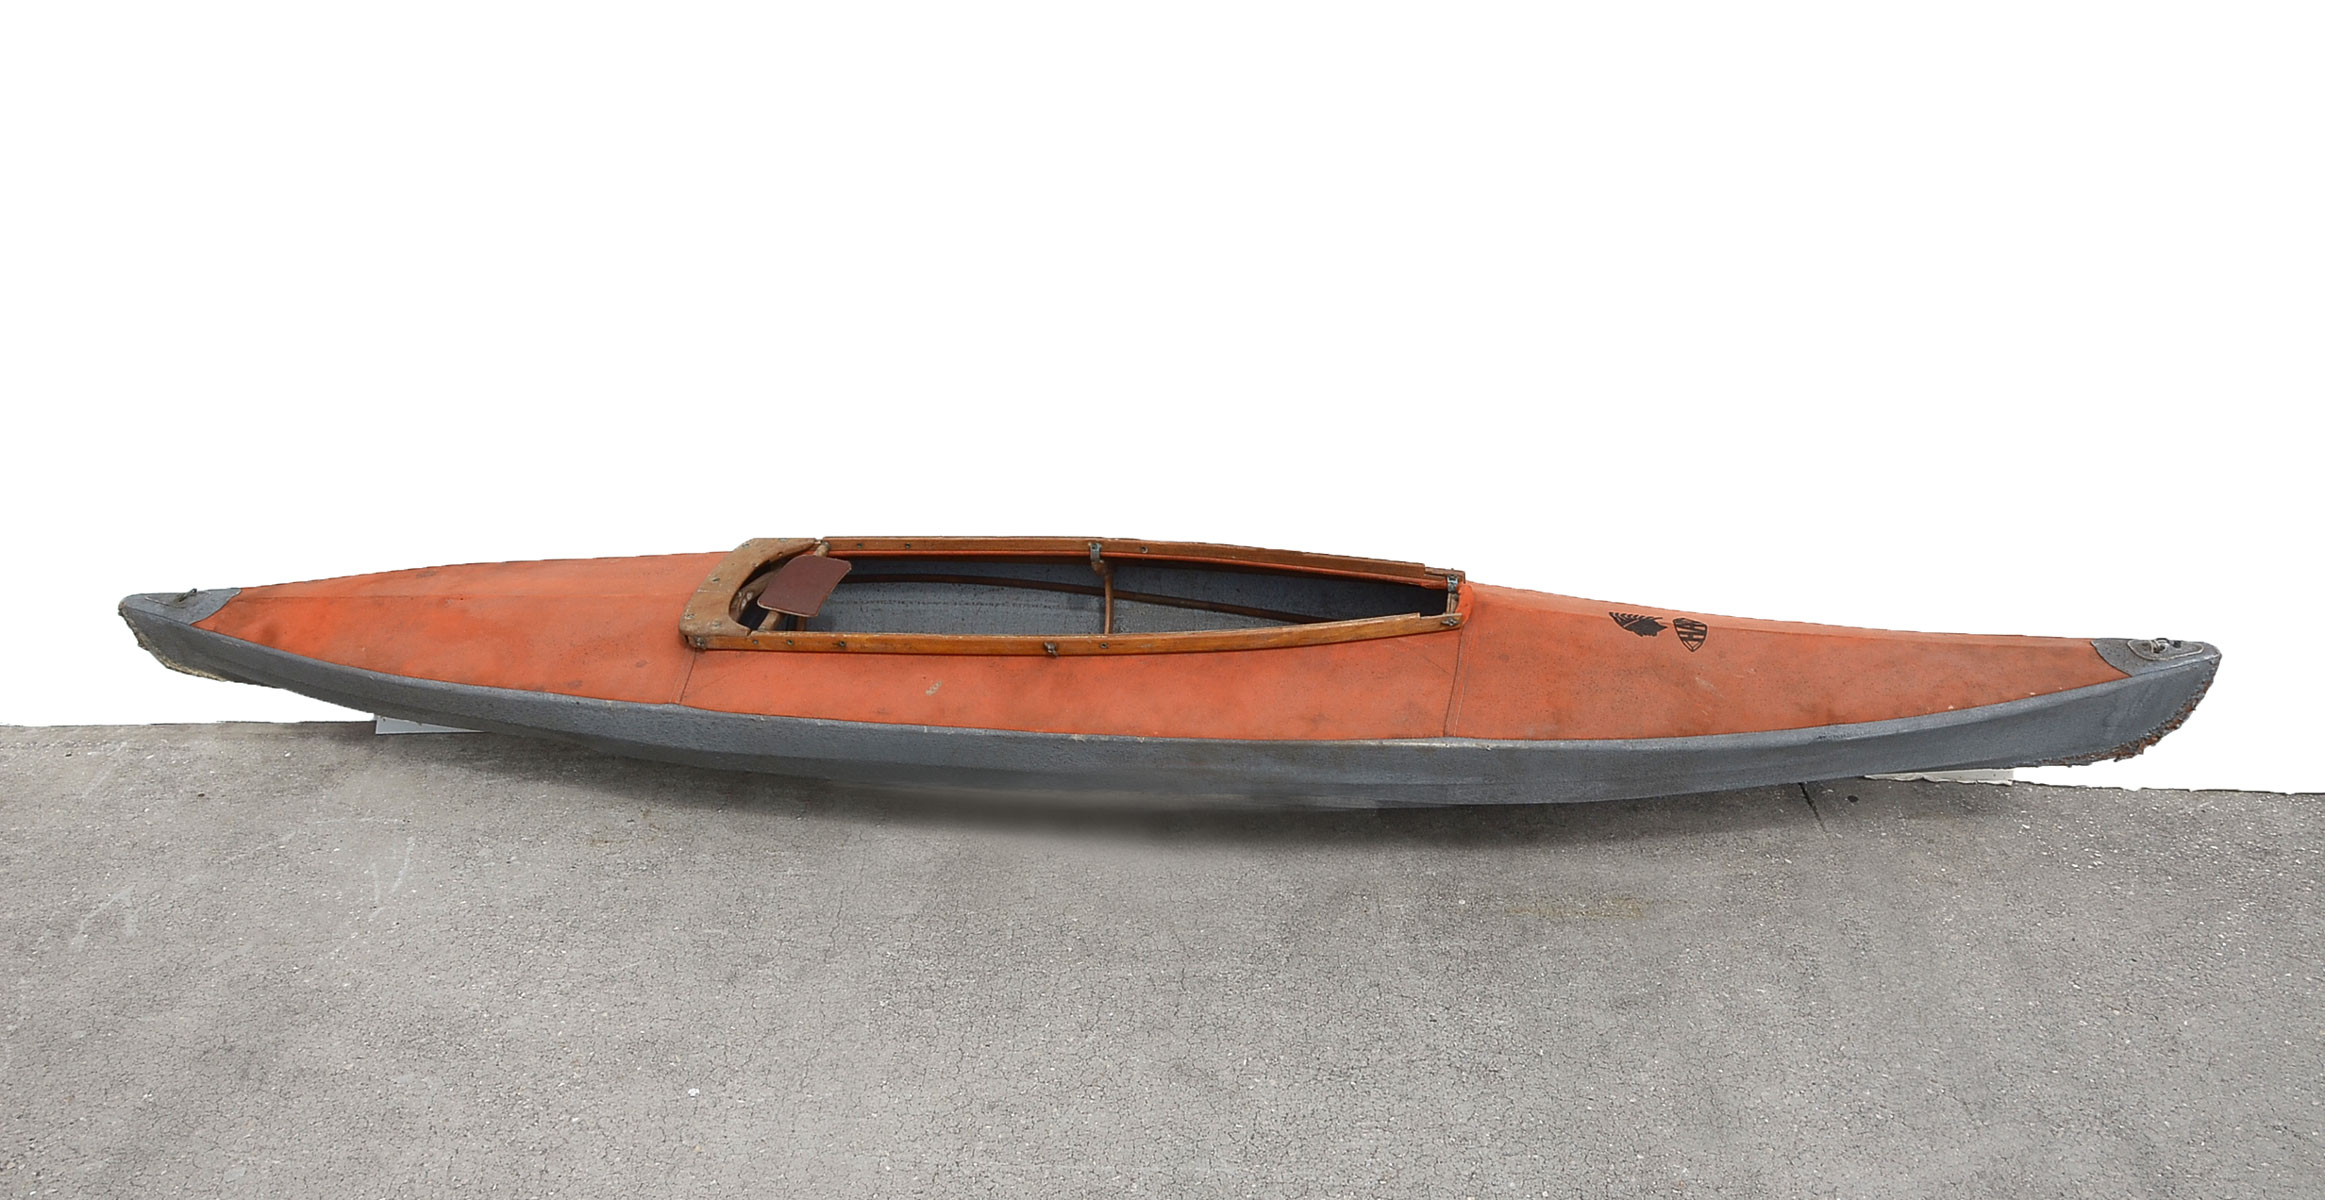 HART-SIOUX PLIANT COLLAPSIBLE KAYAK: